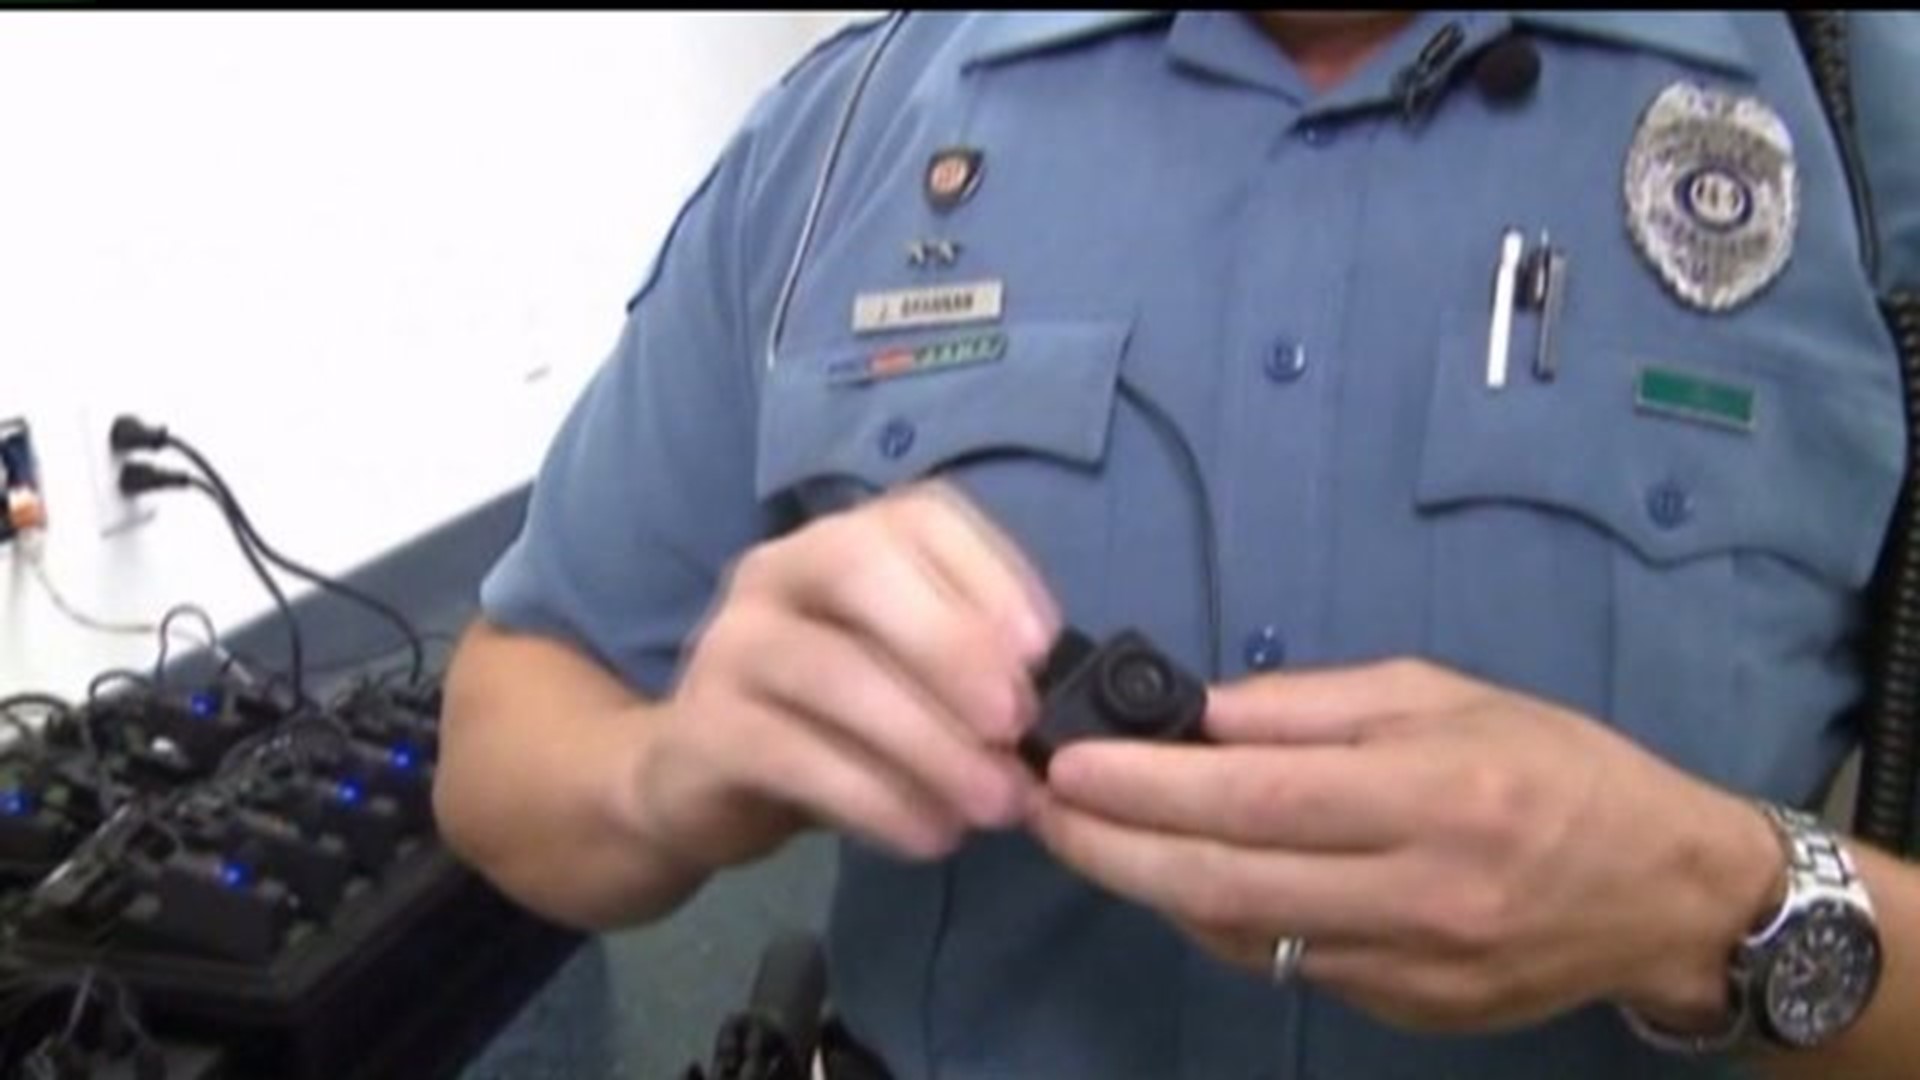 Body cameras for Officers